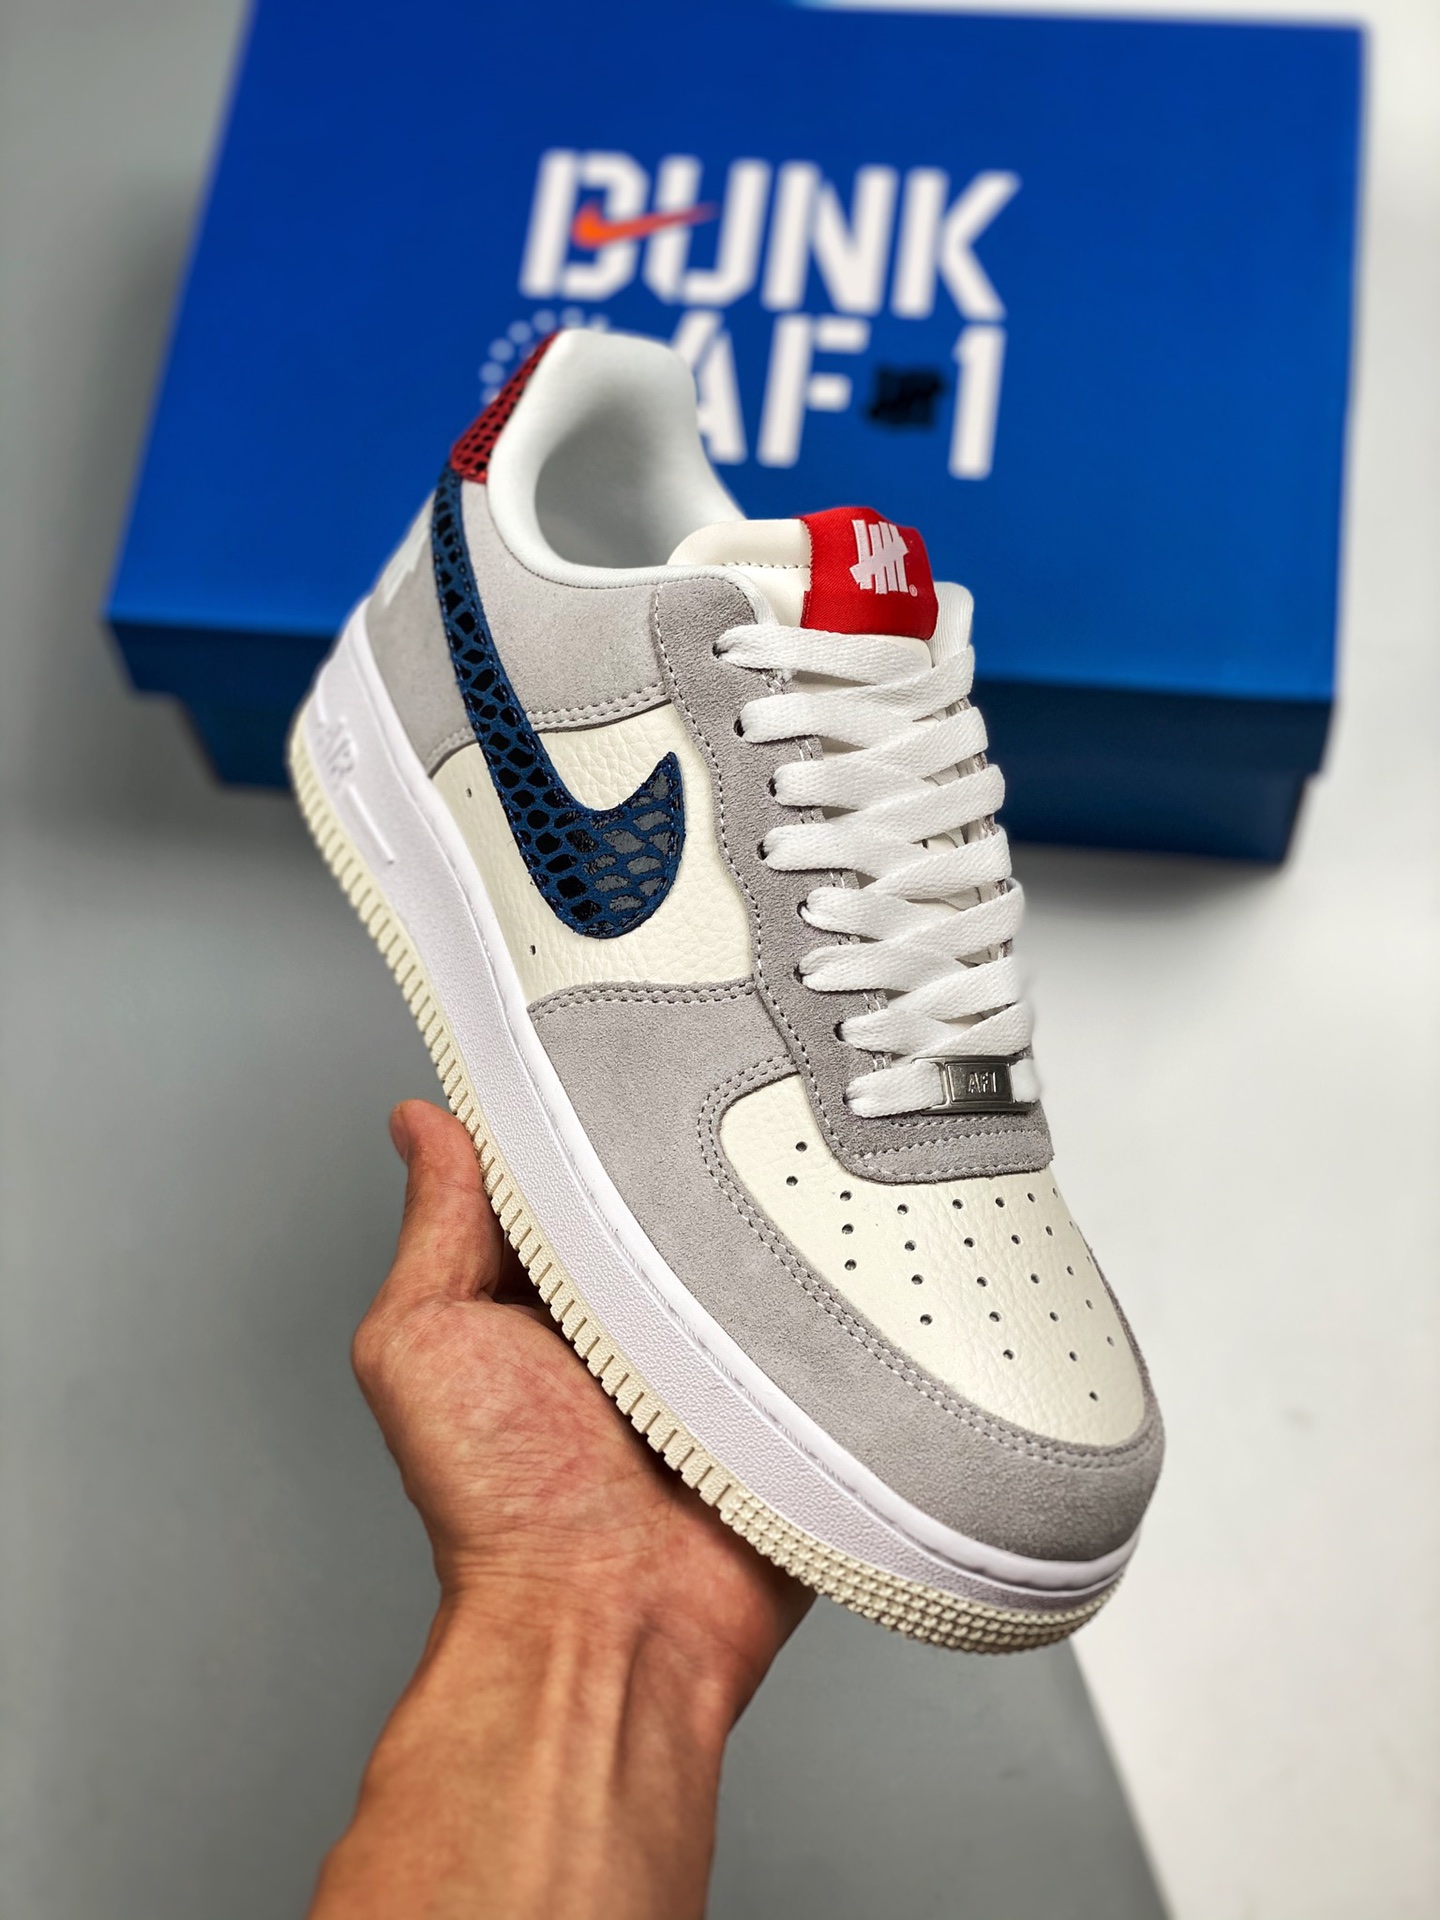 Undefeated x Nike Air AF Force 1 '5 On It' Grey Fog/Imperial Blue Shoes